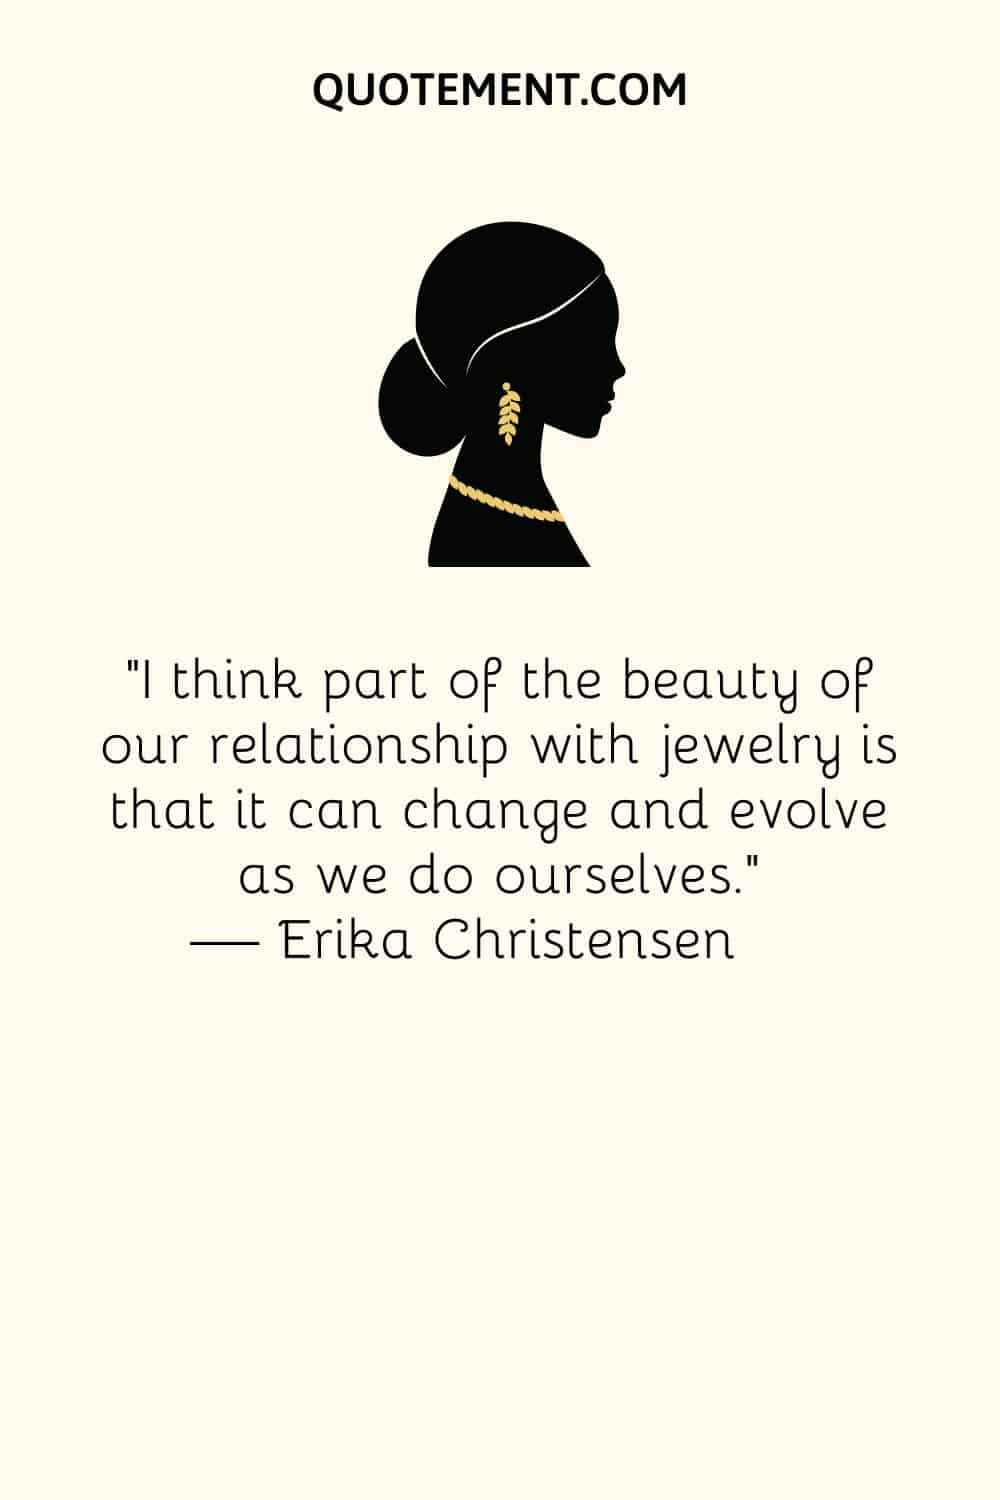 I think part of the beauty of our relationship with jewelry is that it can change and evolve as we do ourselves